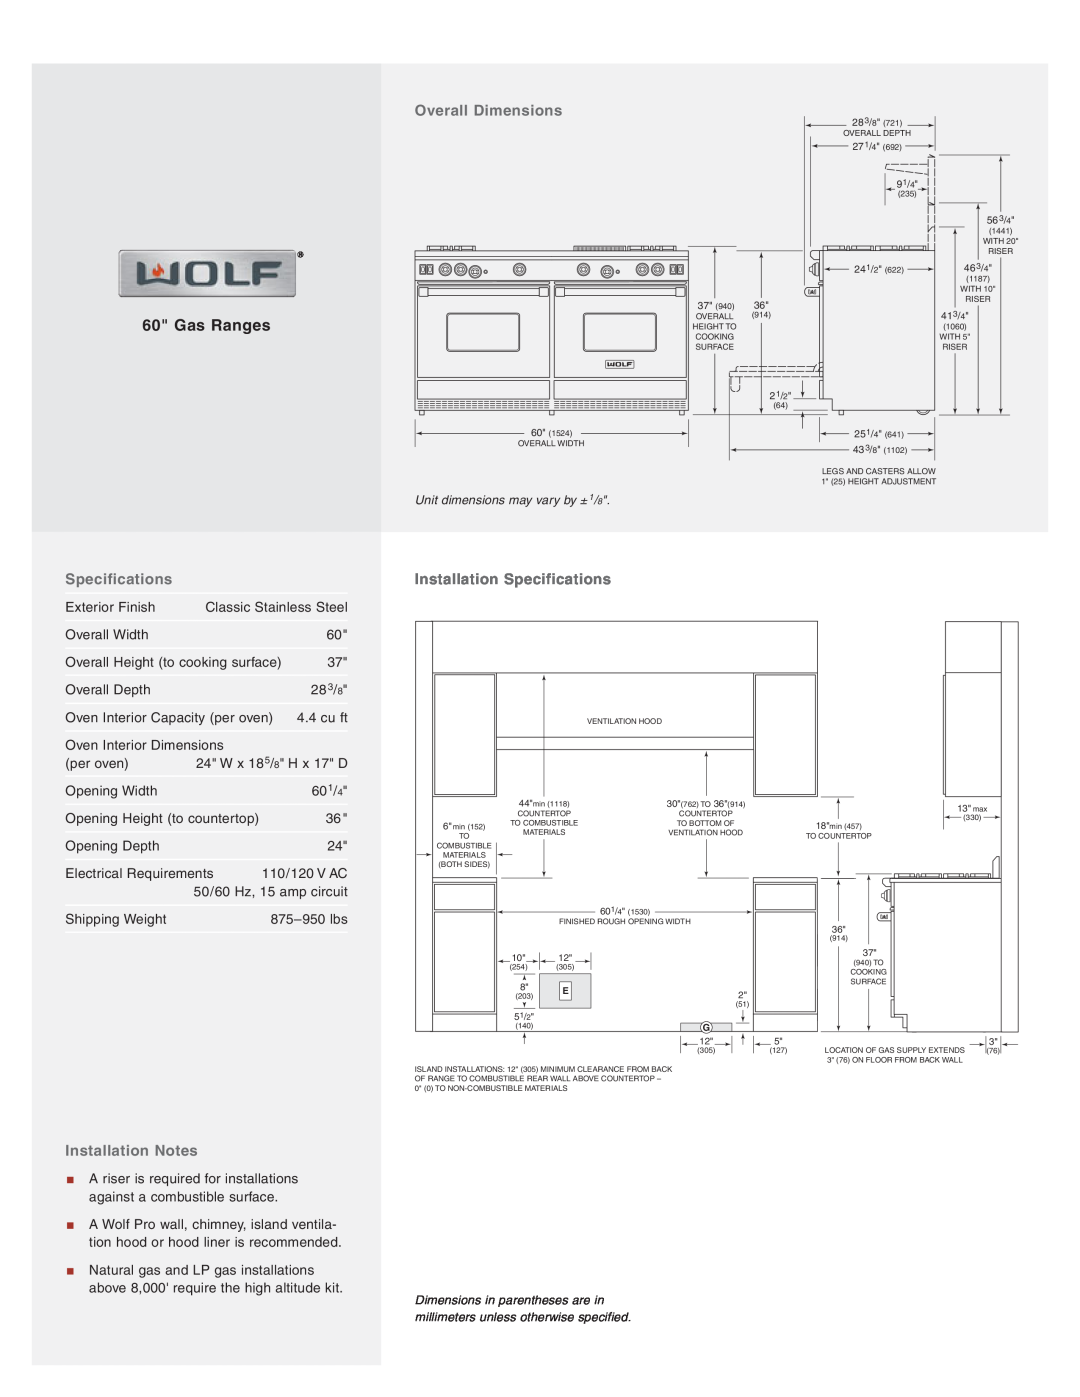 Wolf R606CG, R606DG, R606F manual Overall Dimensions, Installation Notes, Installation Specifications, Gas Ranges 